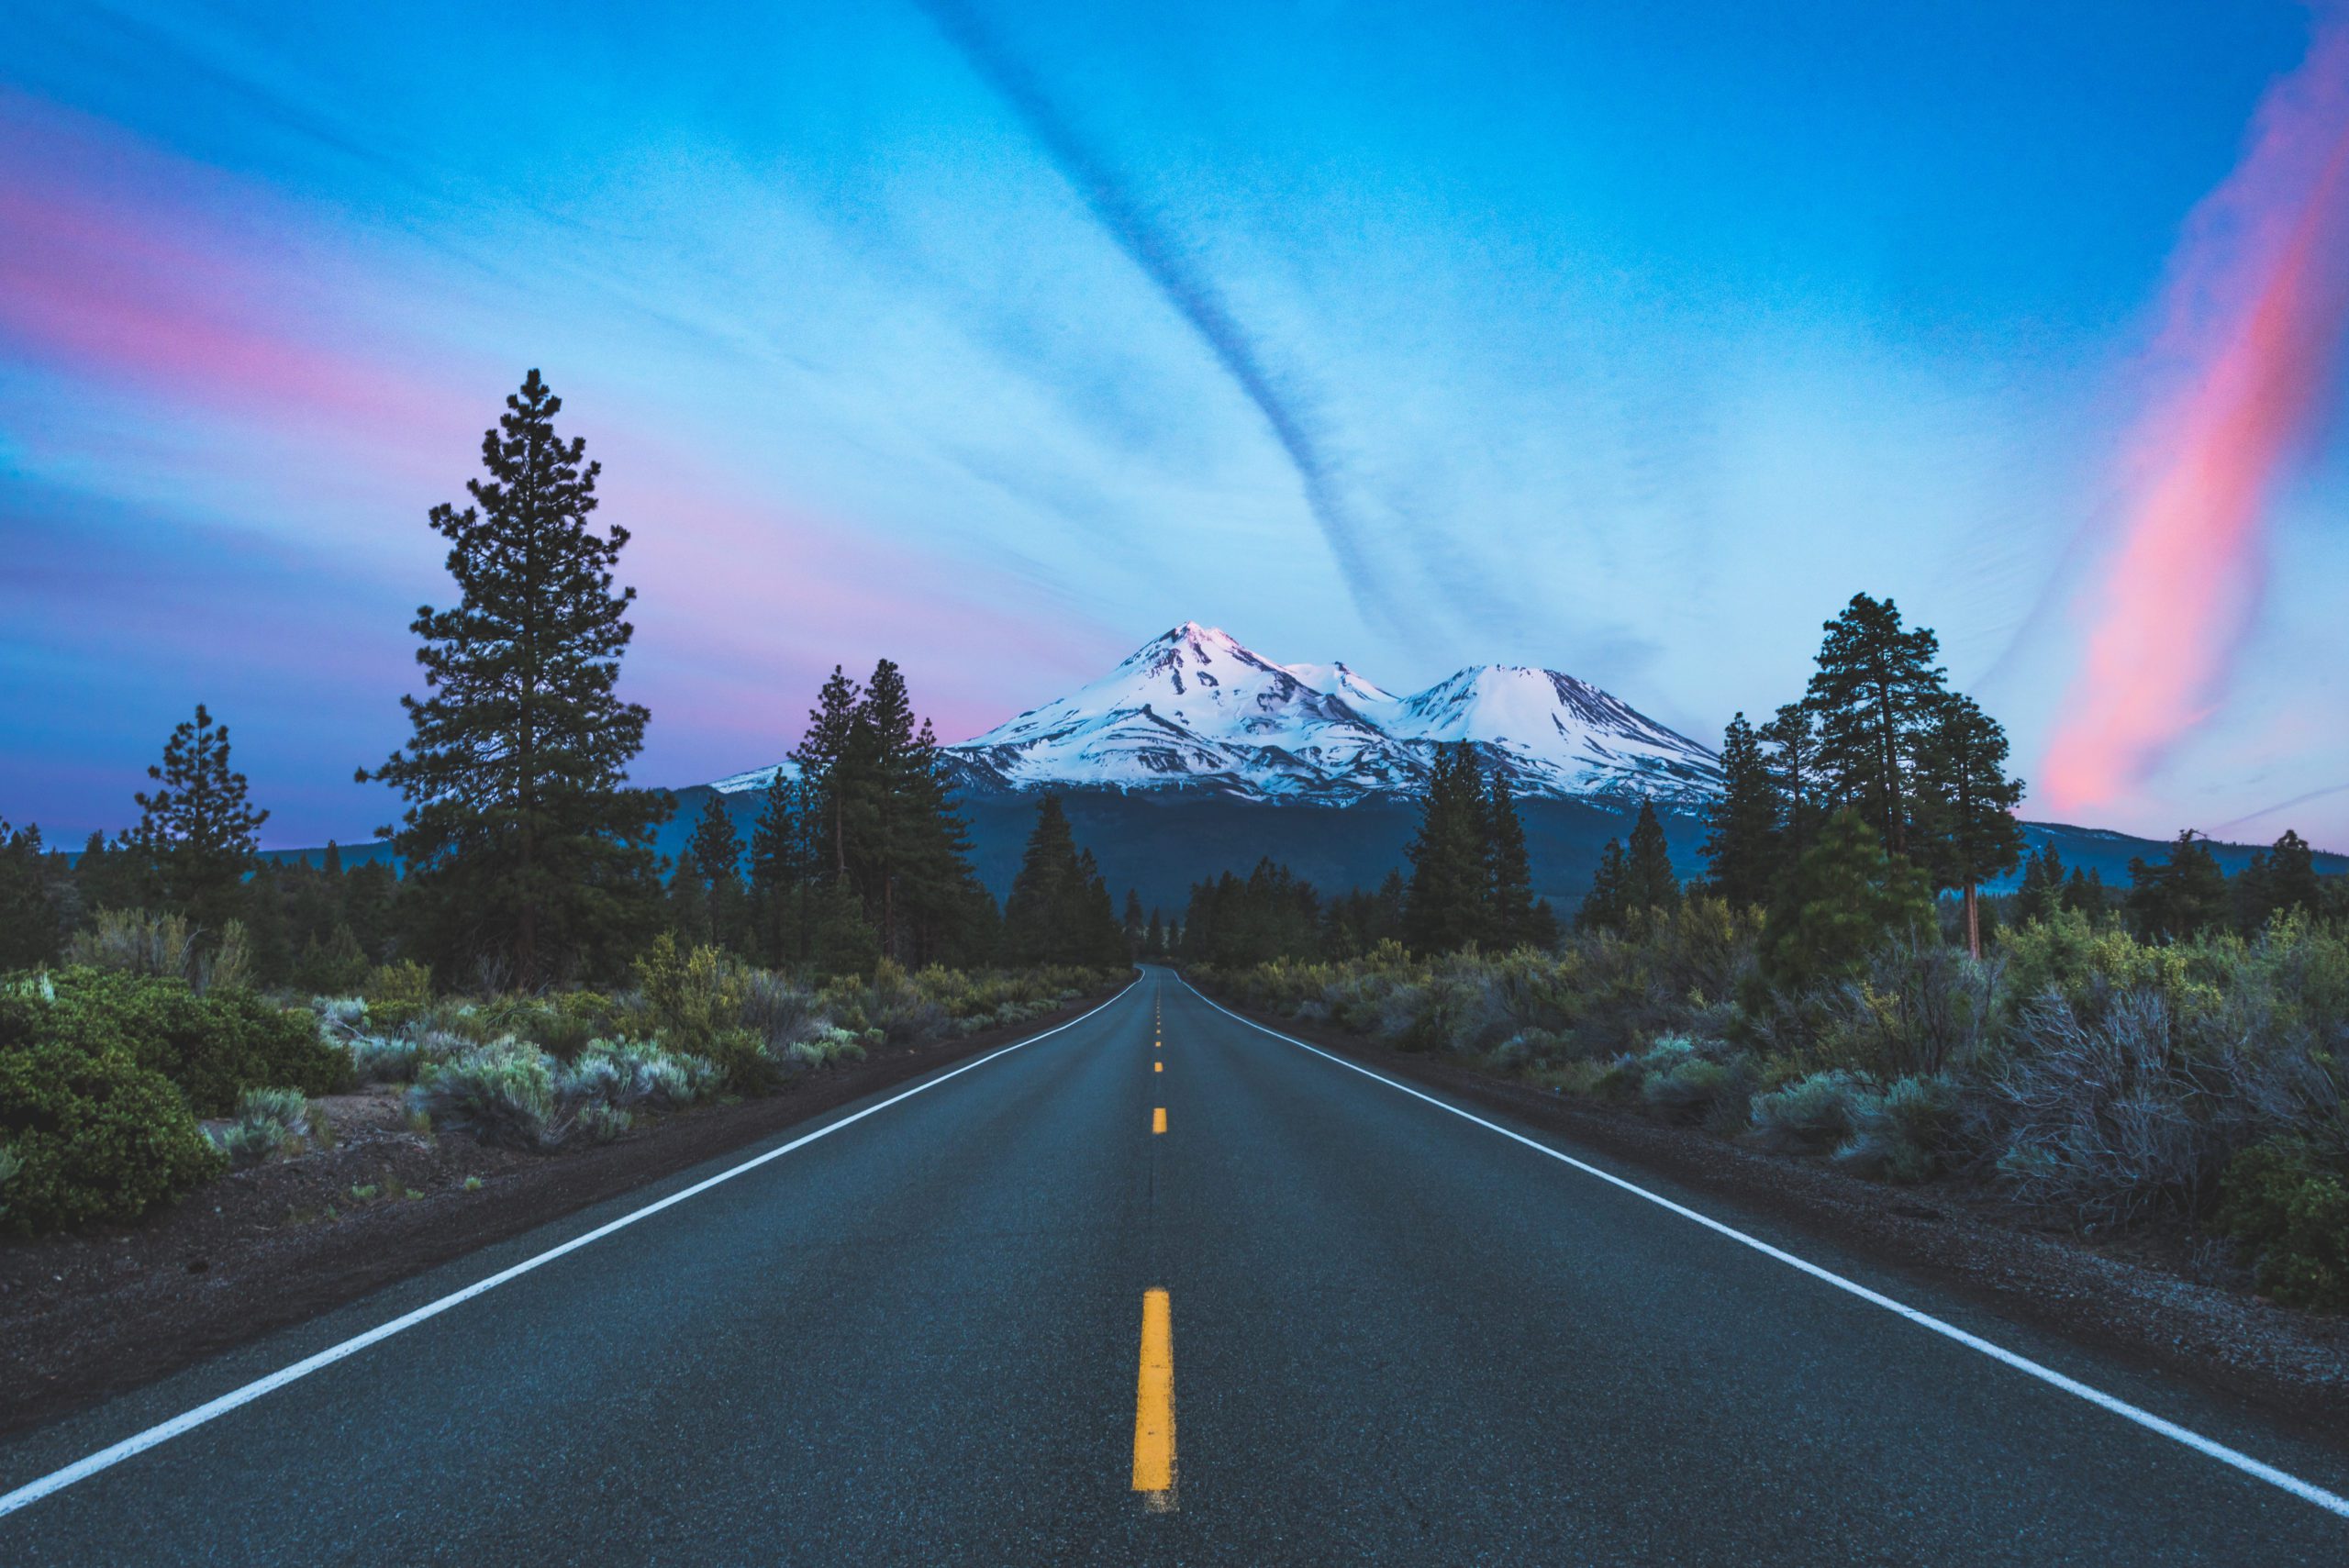 A road leading to snow-capped mountains at sunrise